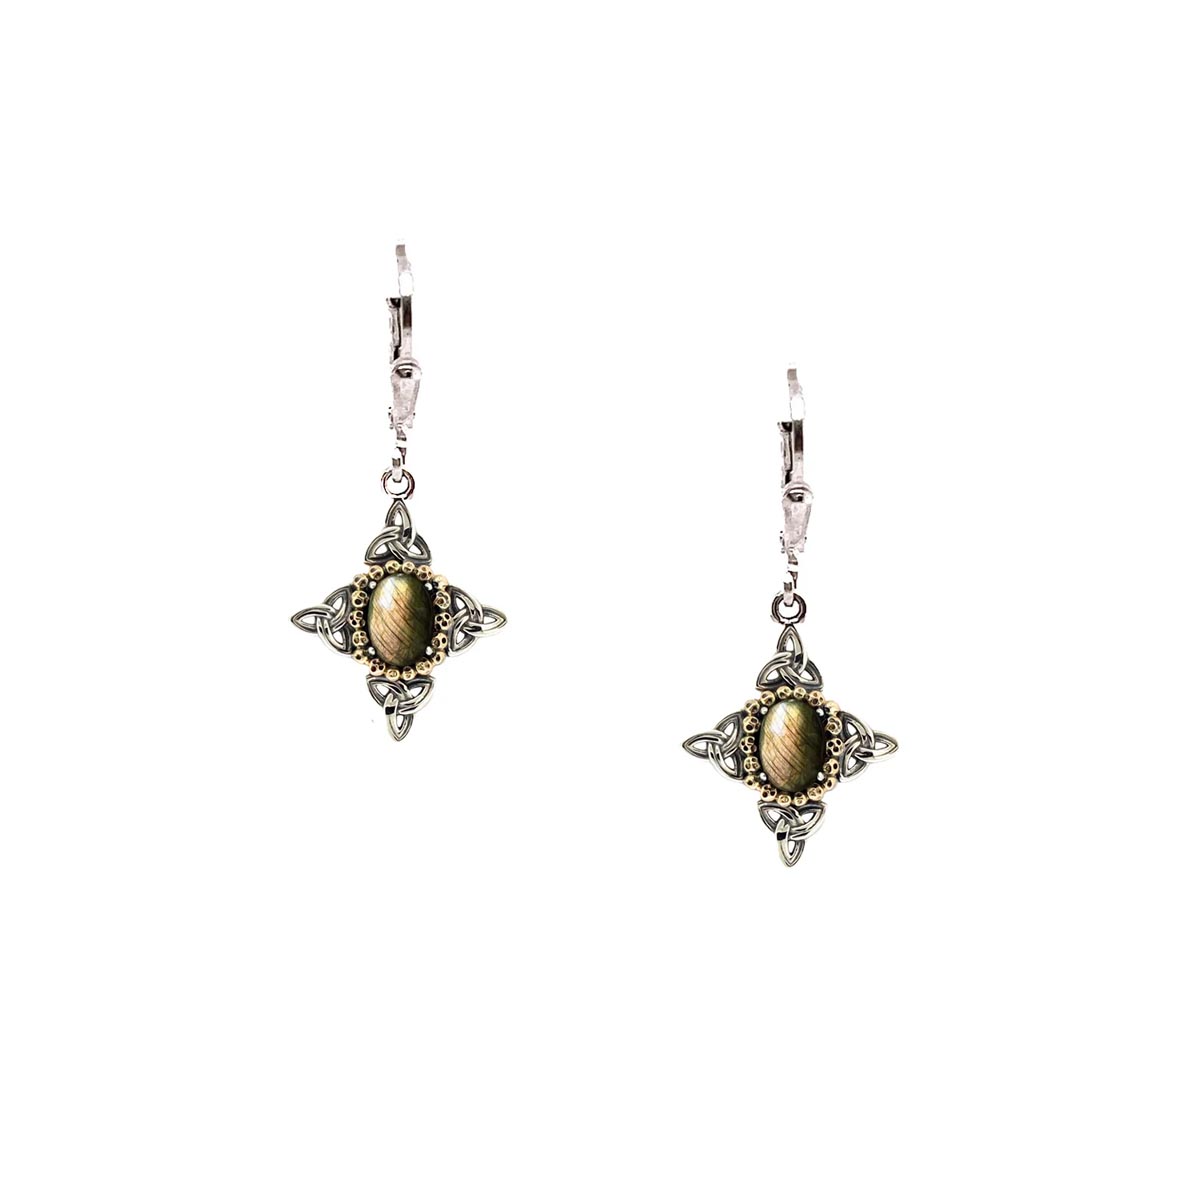 Keith Jack Celestial Oval Labradorite Drop Earrings in Sterling Silver and 10kt Yellow Gold